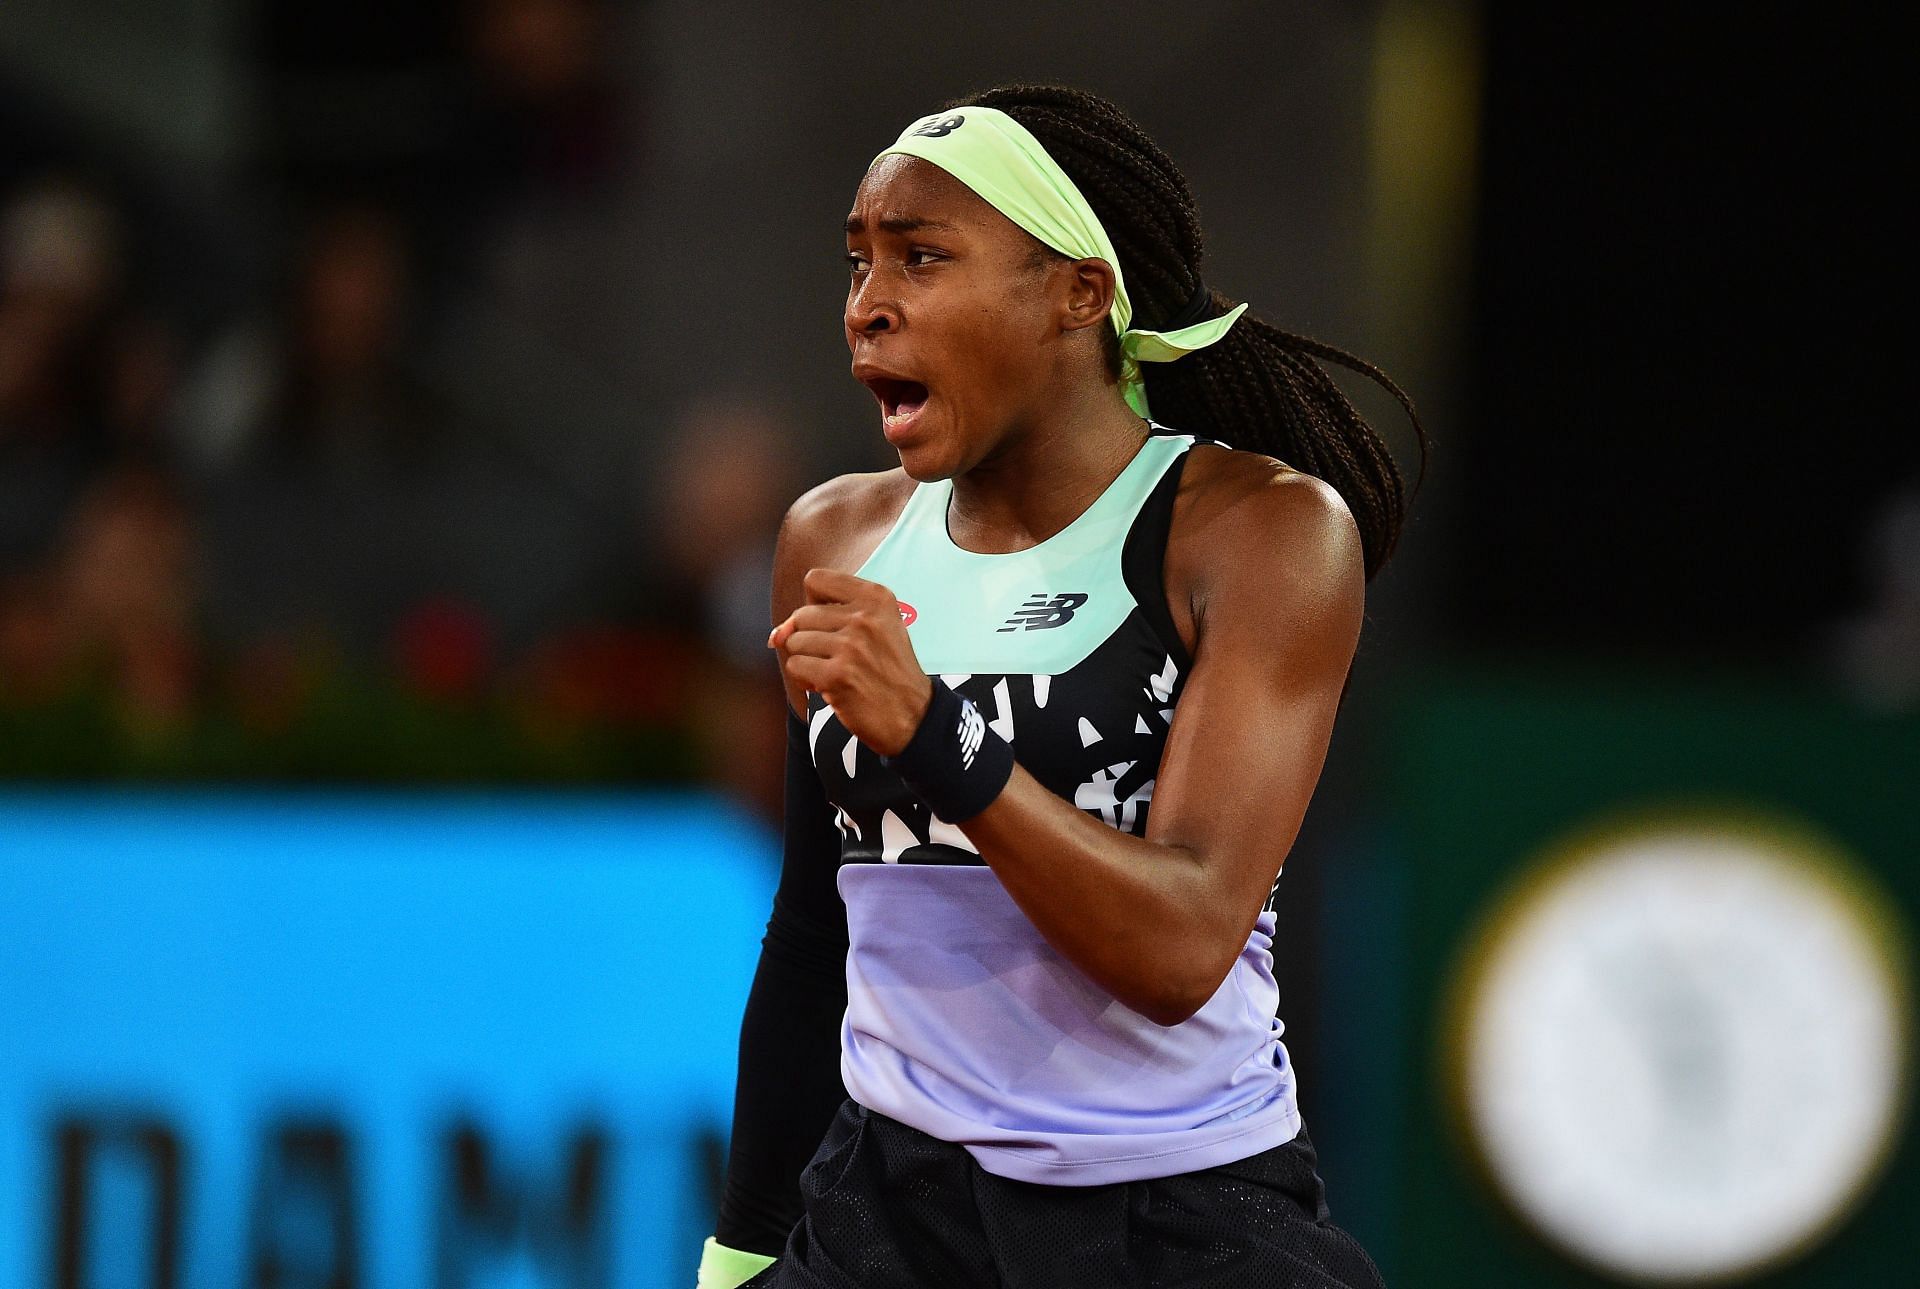 Coco Gauff advances to the second round in Rome with her victory over Angelique Kerber.